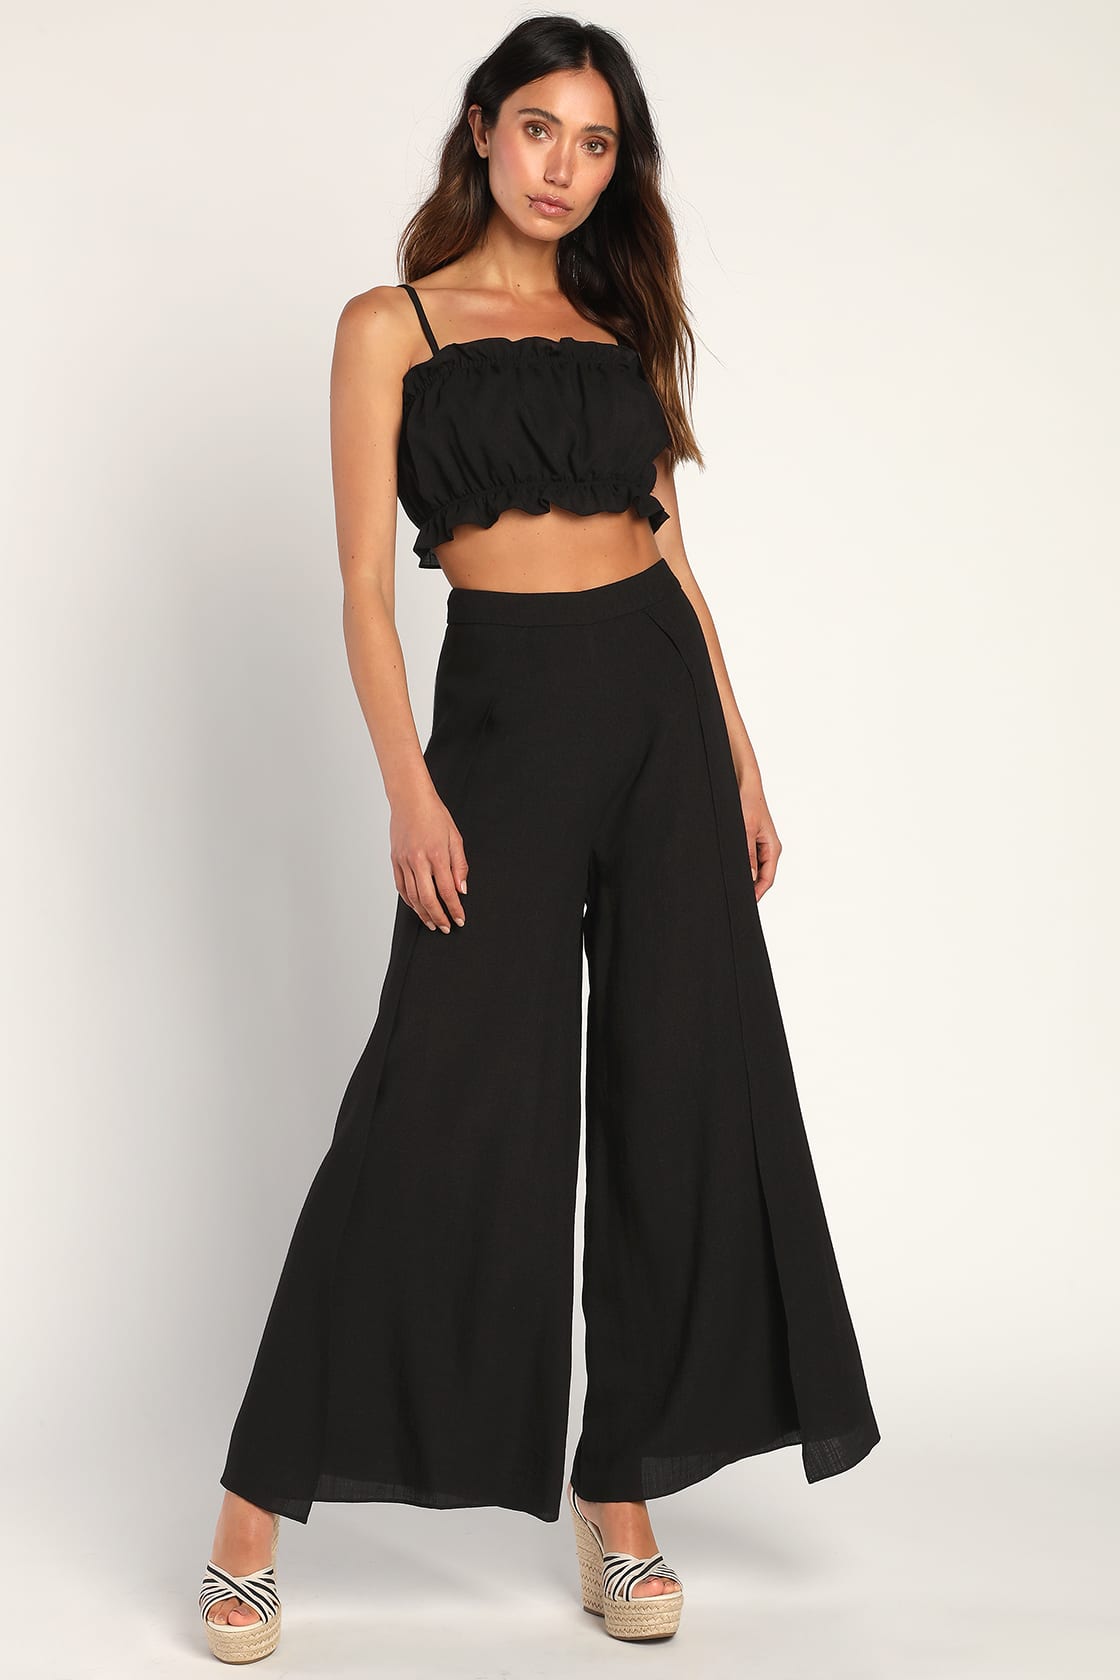 Postcards From Me Black Ruffled Two-Piece Jumpsuit